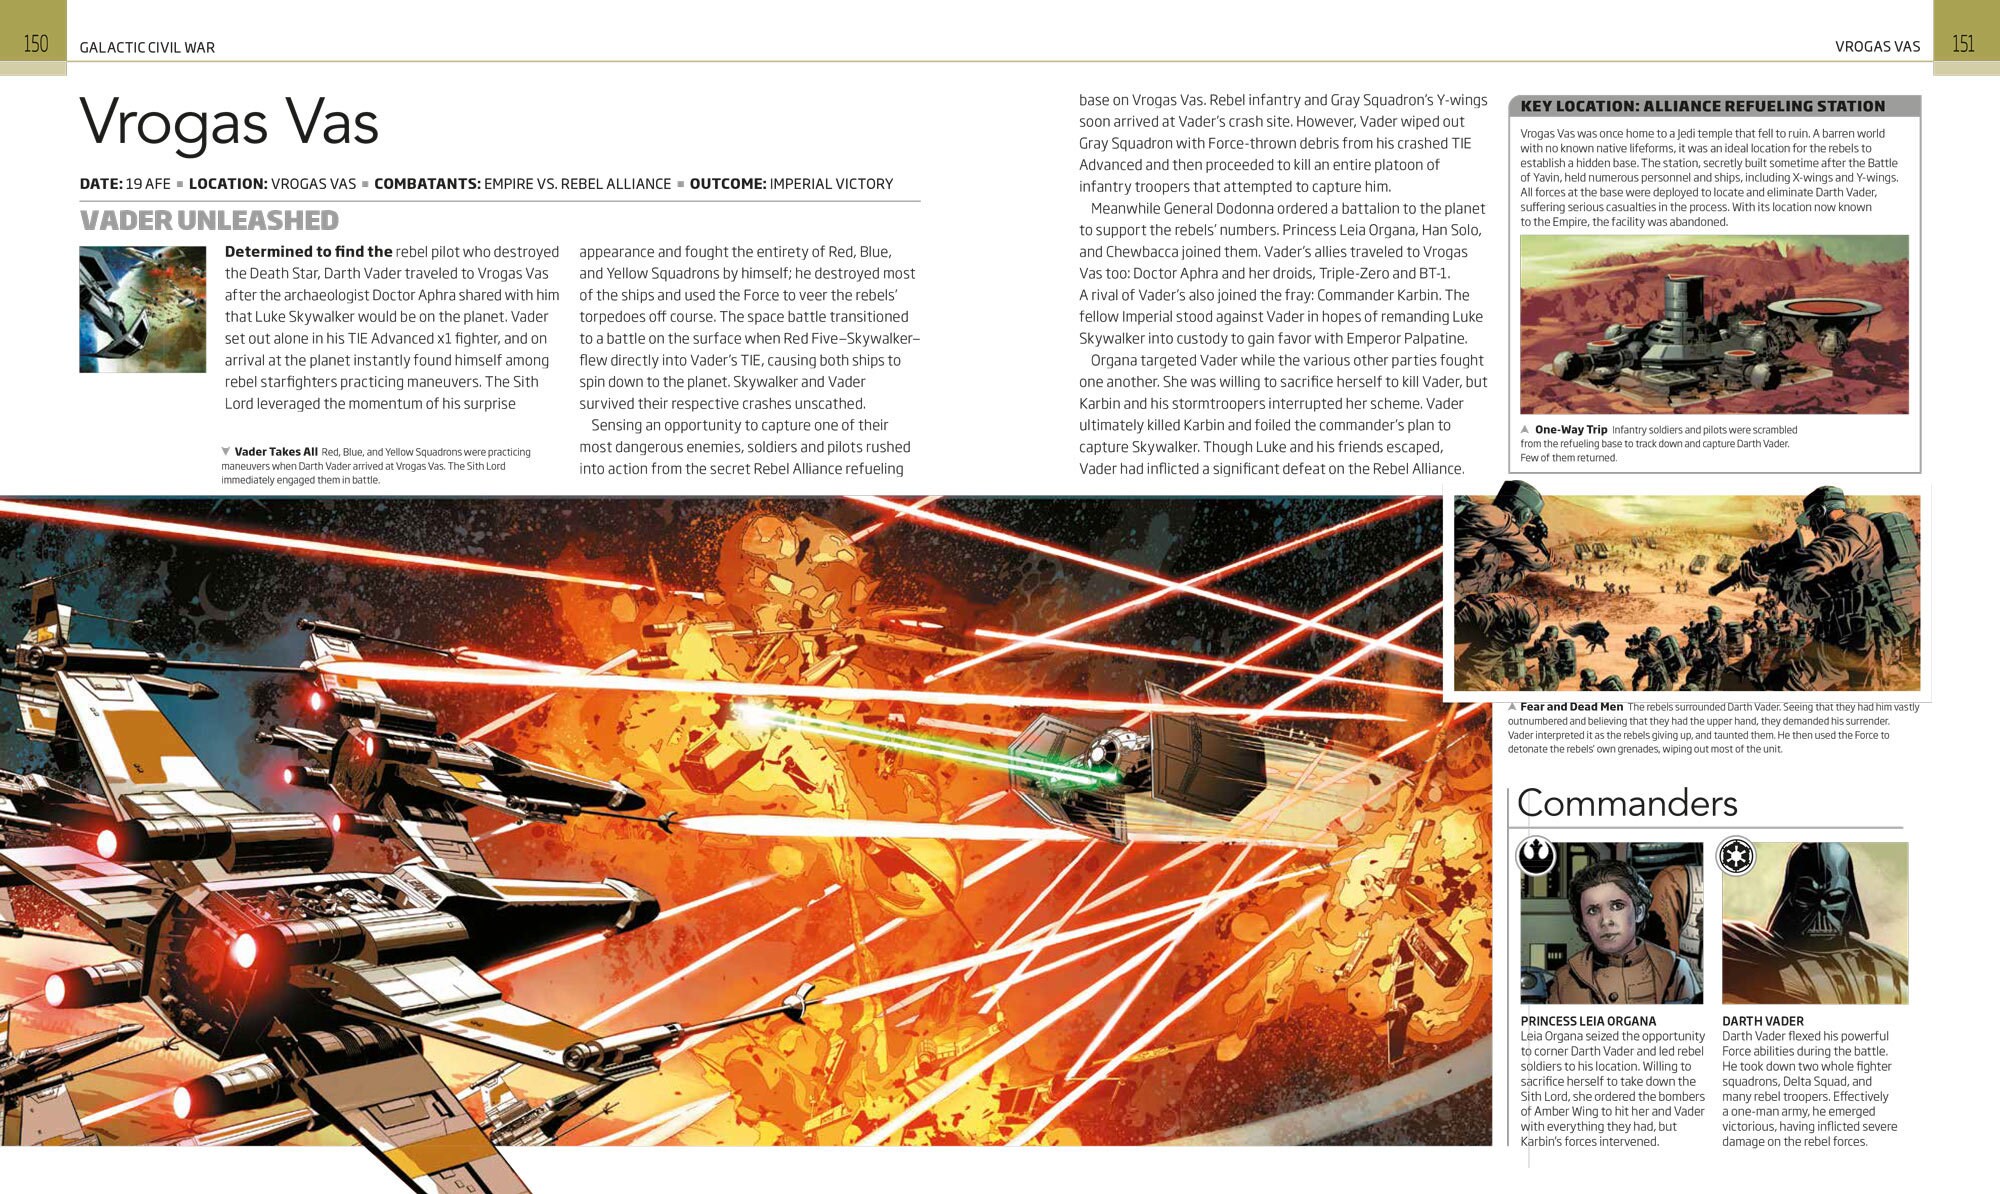 Star Wars: Battles that Changed the Galaxy preview 5